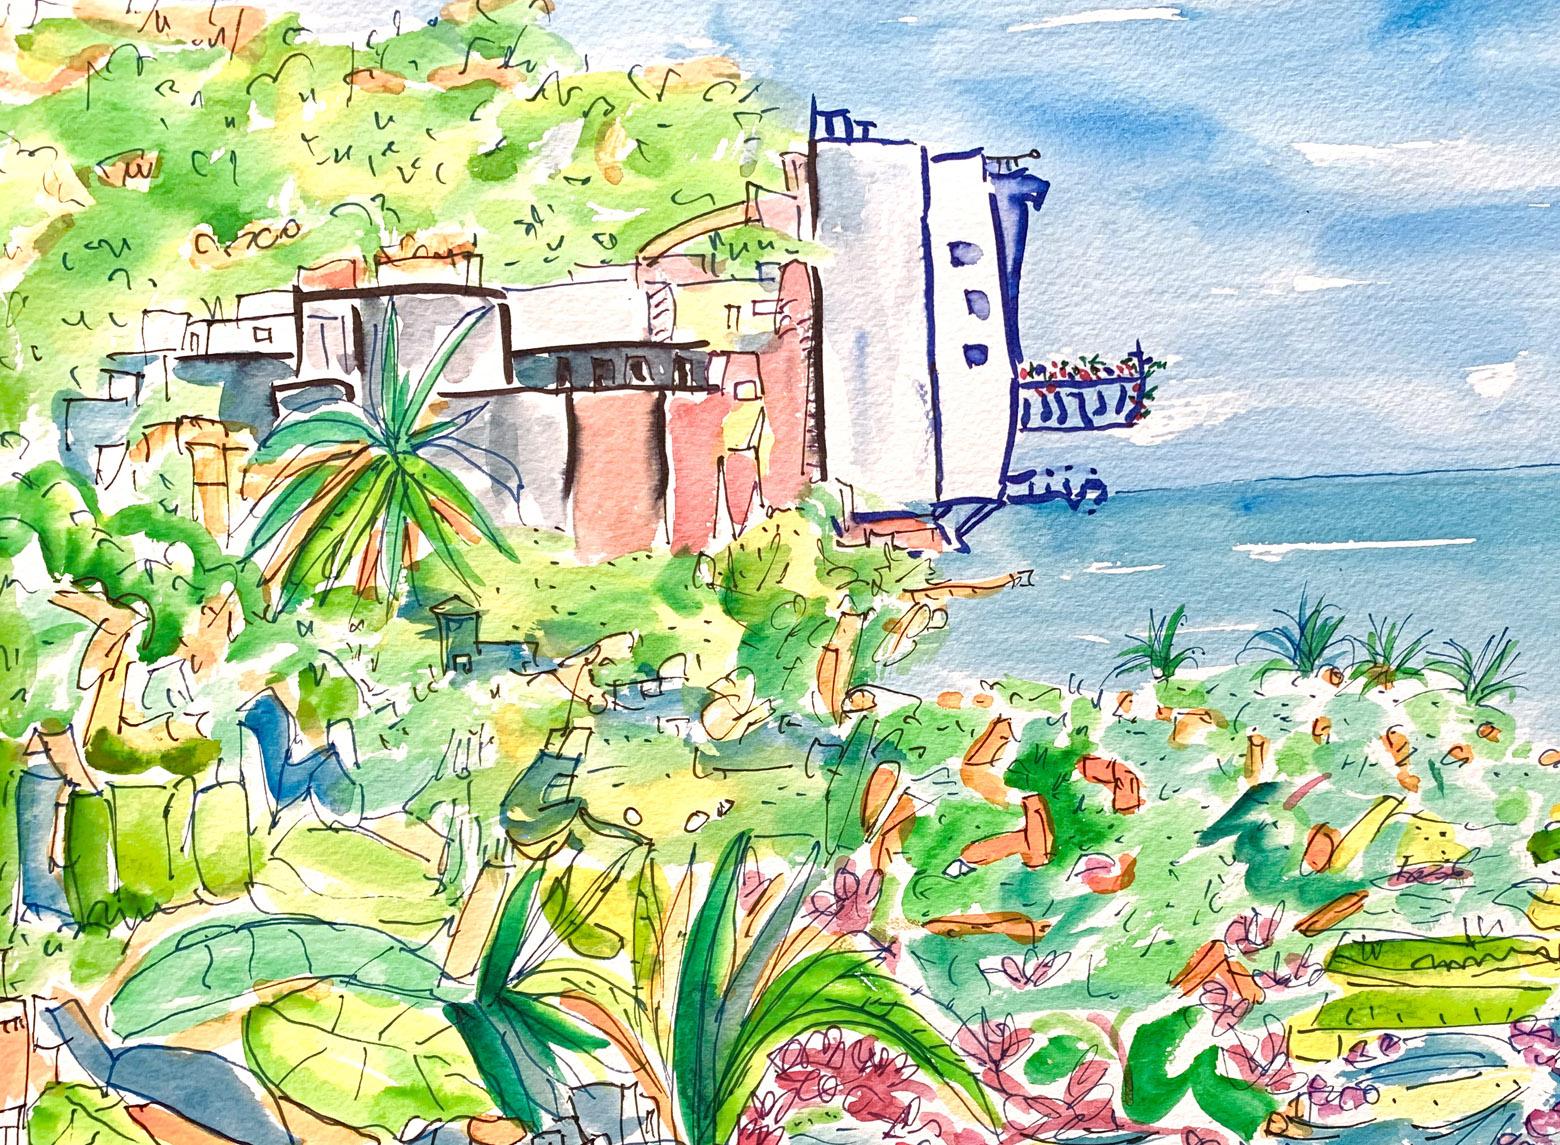 Free Flowing, Puerto Vallarta 2018 12x16 watercolor on paper 1 - Painting by Haroutune Armenian